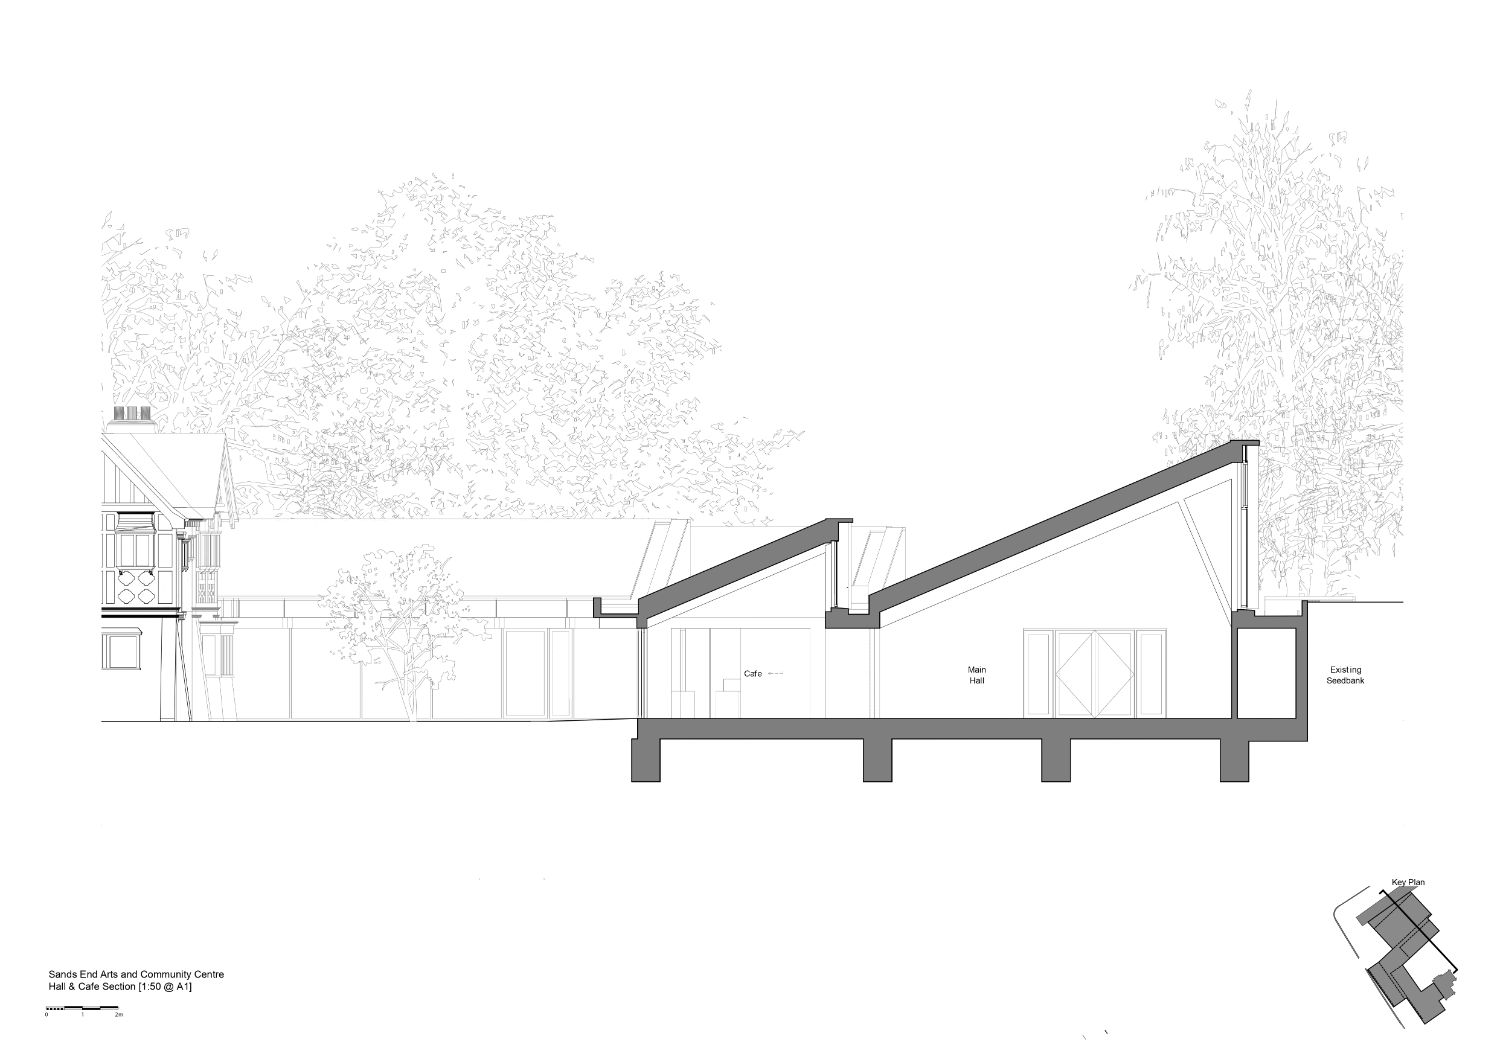 Section drawing of Sands End Arts & Community Centre